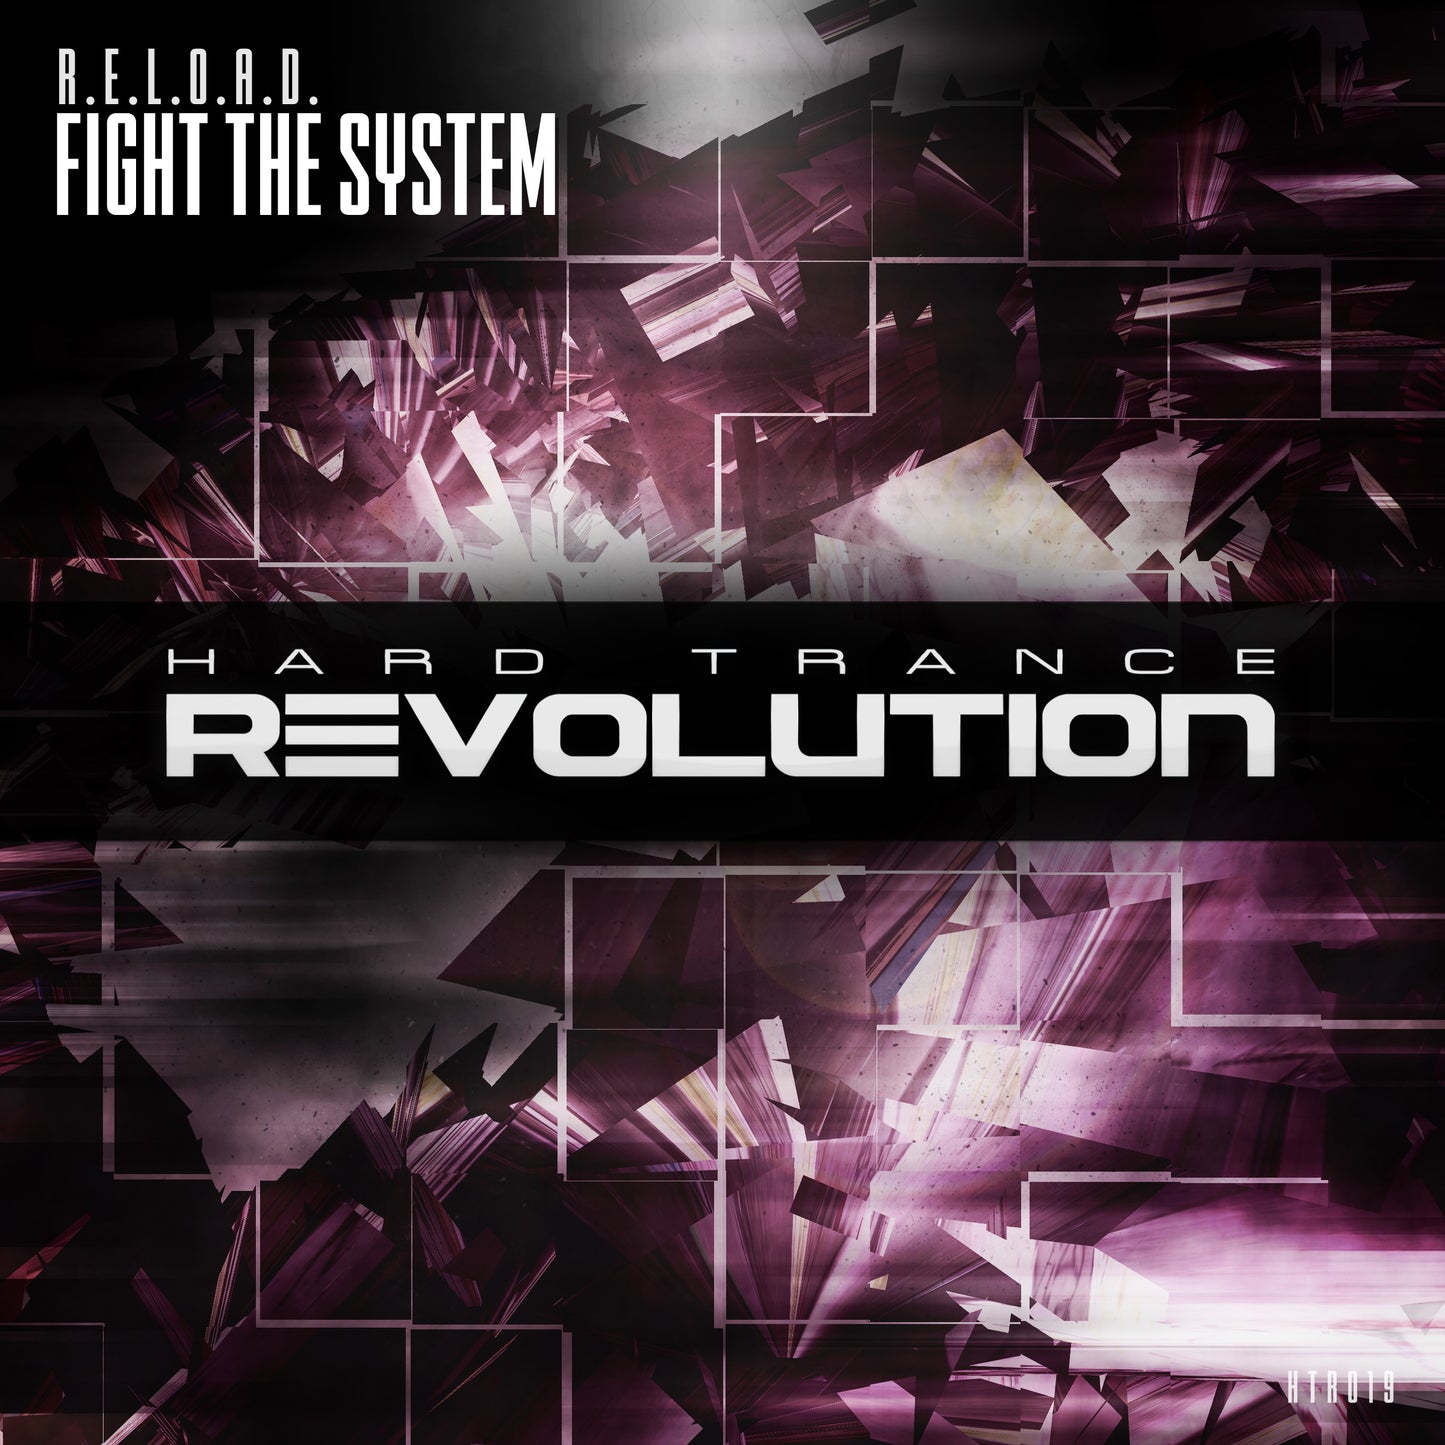 HTR019 - R.E.L.O.A.D. - Fight The System (Extended Mix)